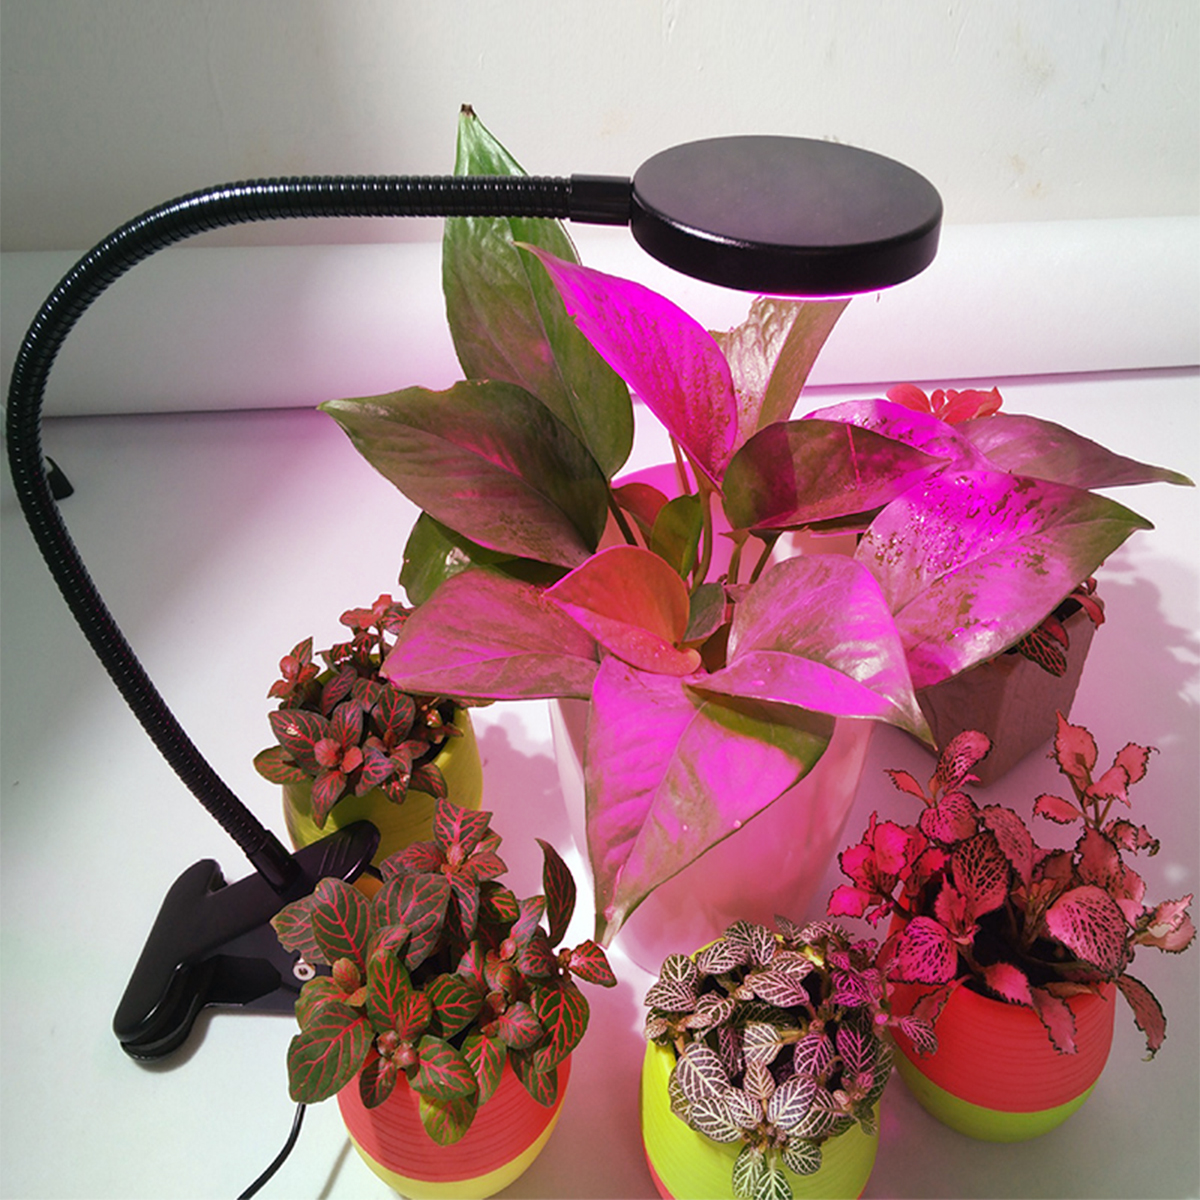 Clip-Plant-Fill-Light-LED-Grow-Light-Fleshy-Planting-Double-Head-Timing-With-Clips-Like-Sun-1388863-10